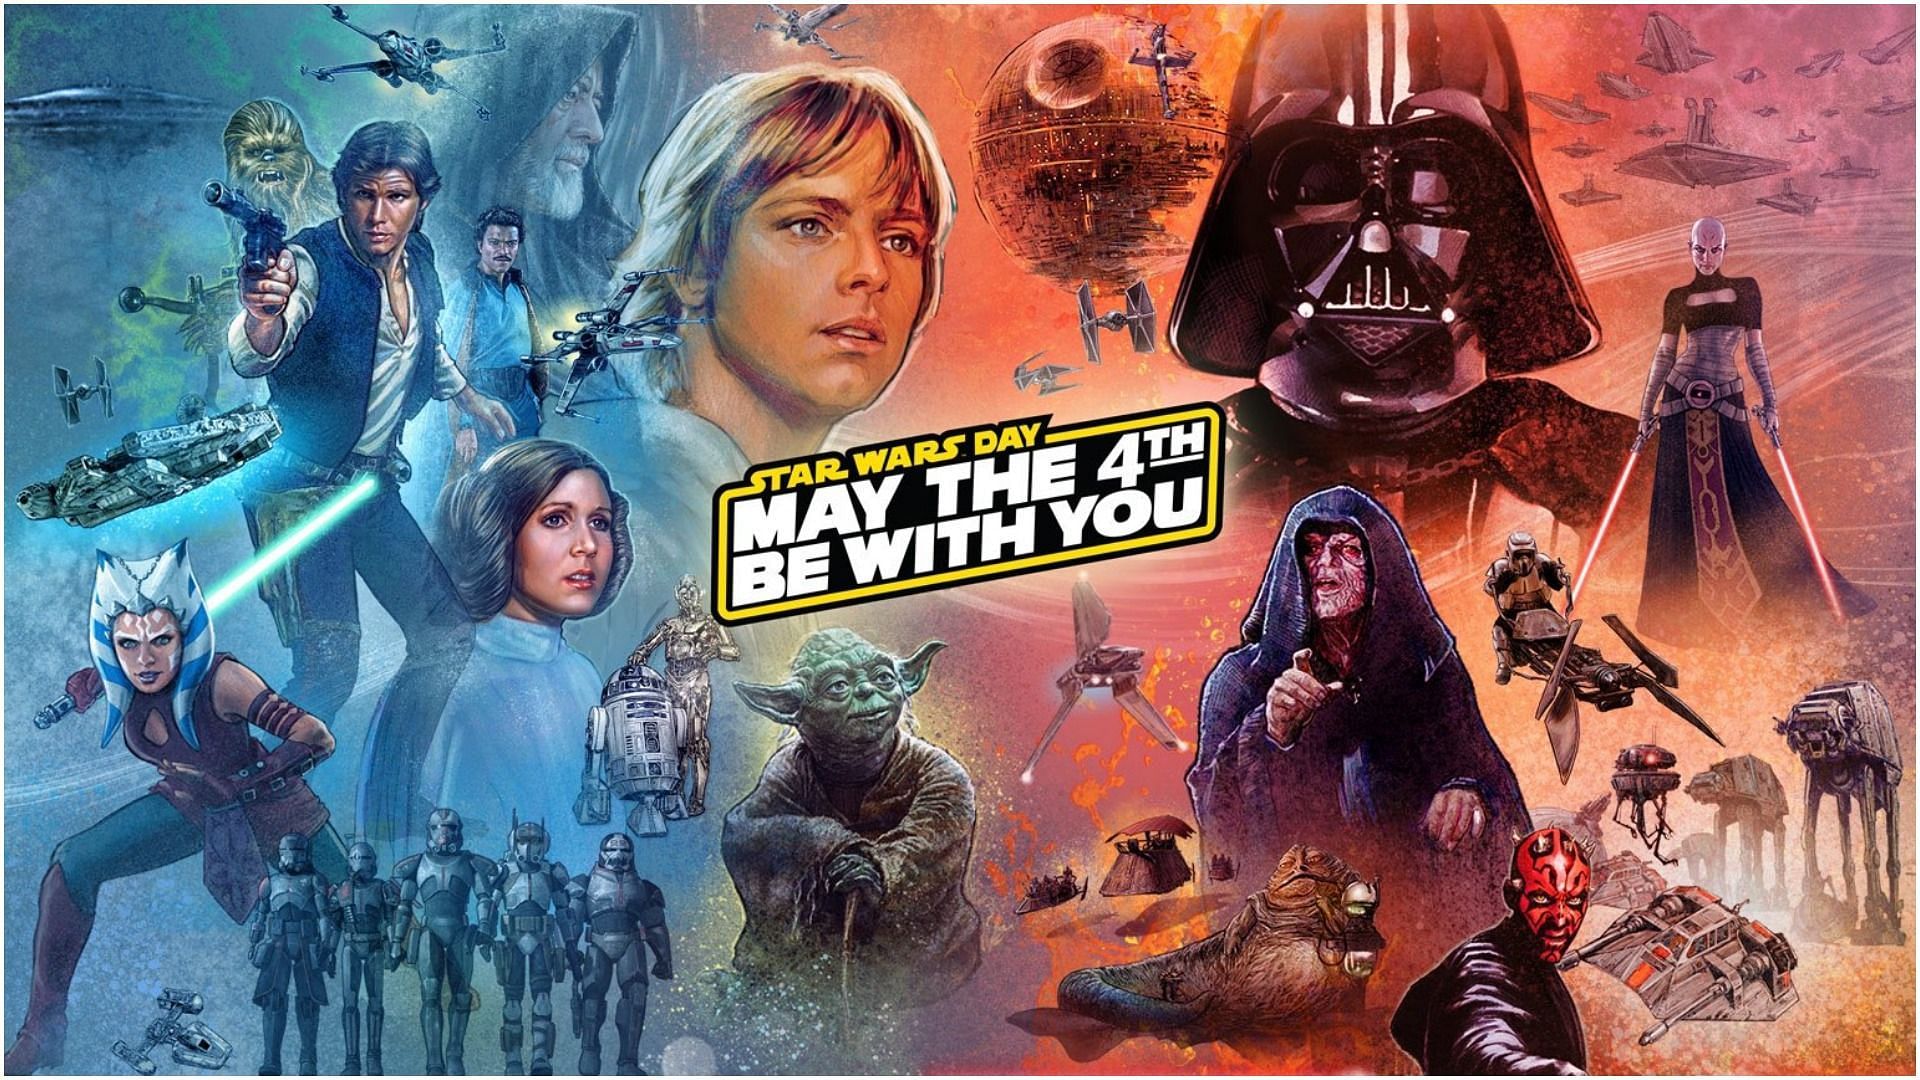 &quot;May the 4th be with you&quot; is an integral part of the Star Wars franchise (Image via @Scully536359682/Twitter)